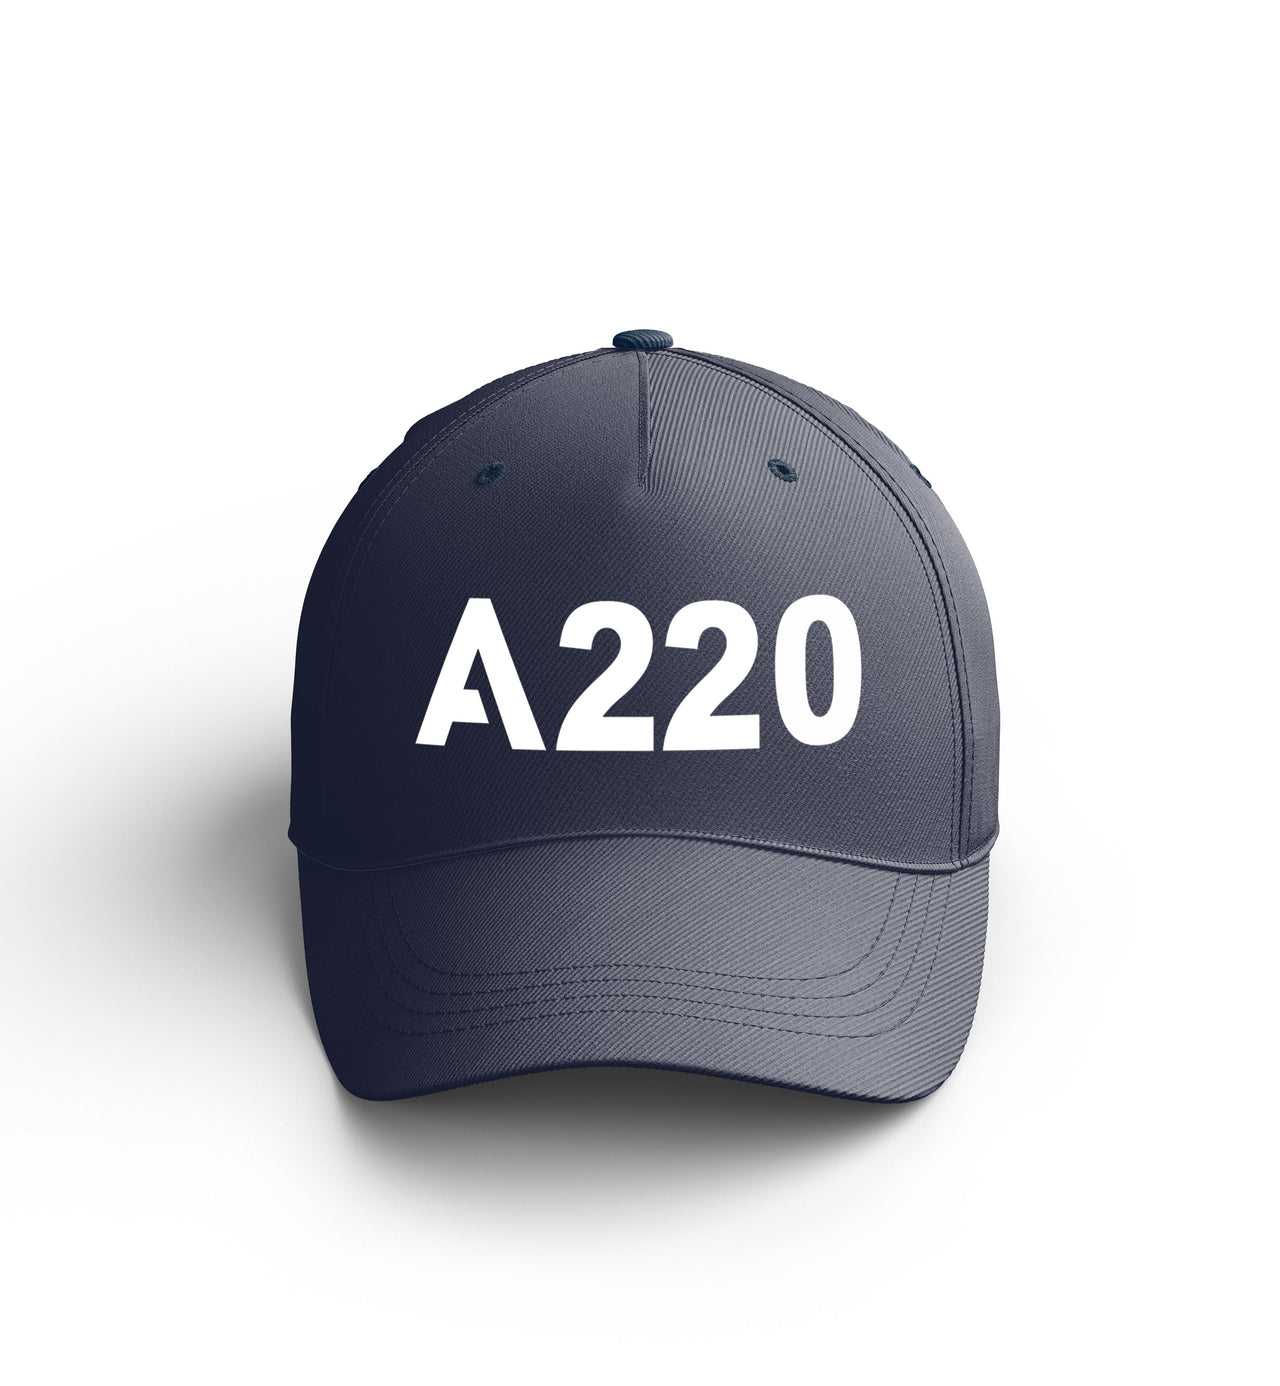 Customizable Name & A220 Flat Text Embroidered Hats